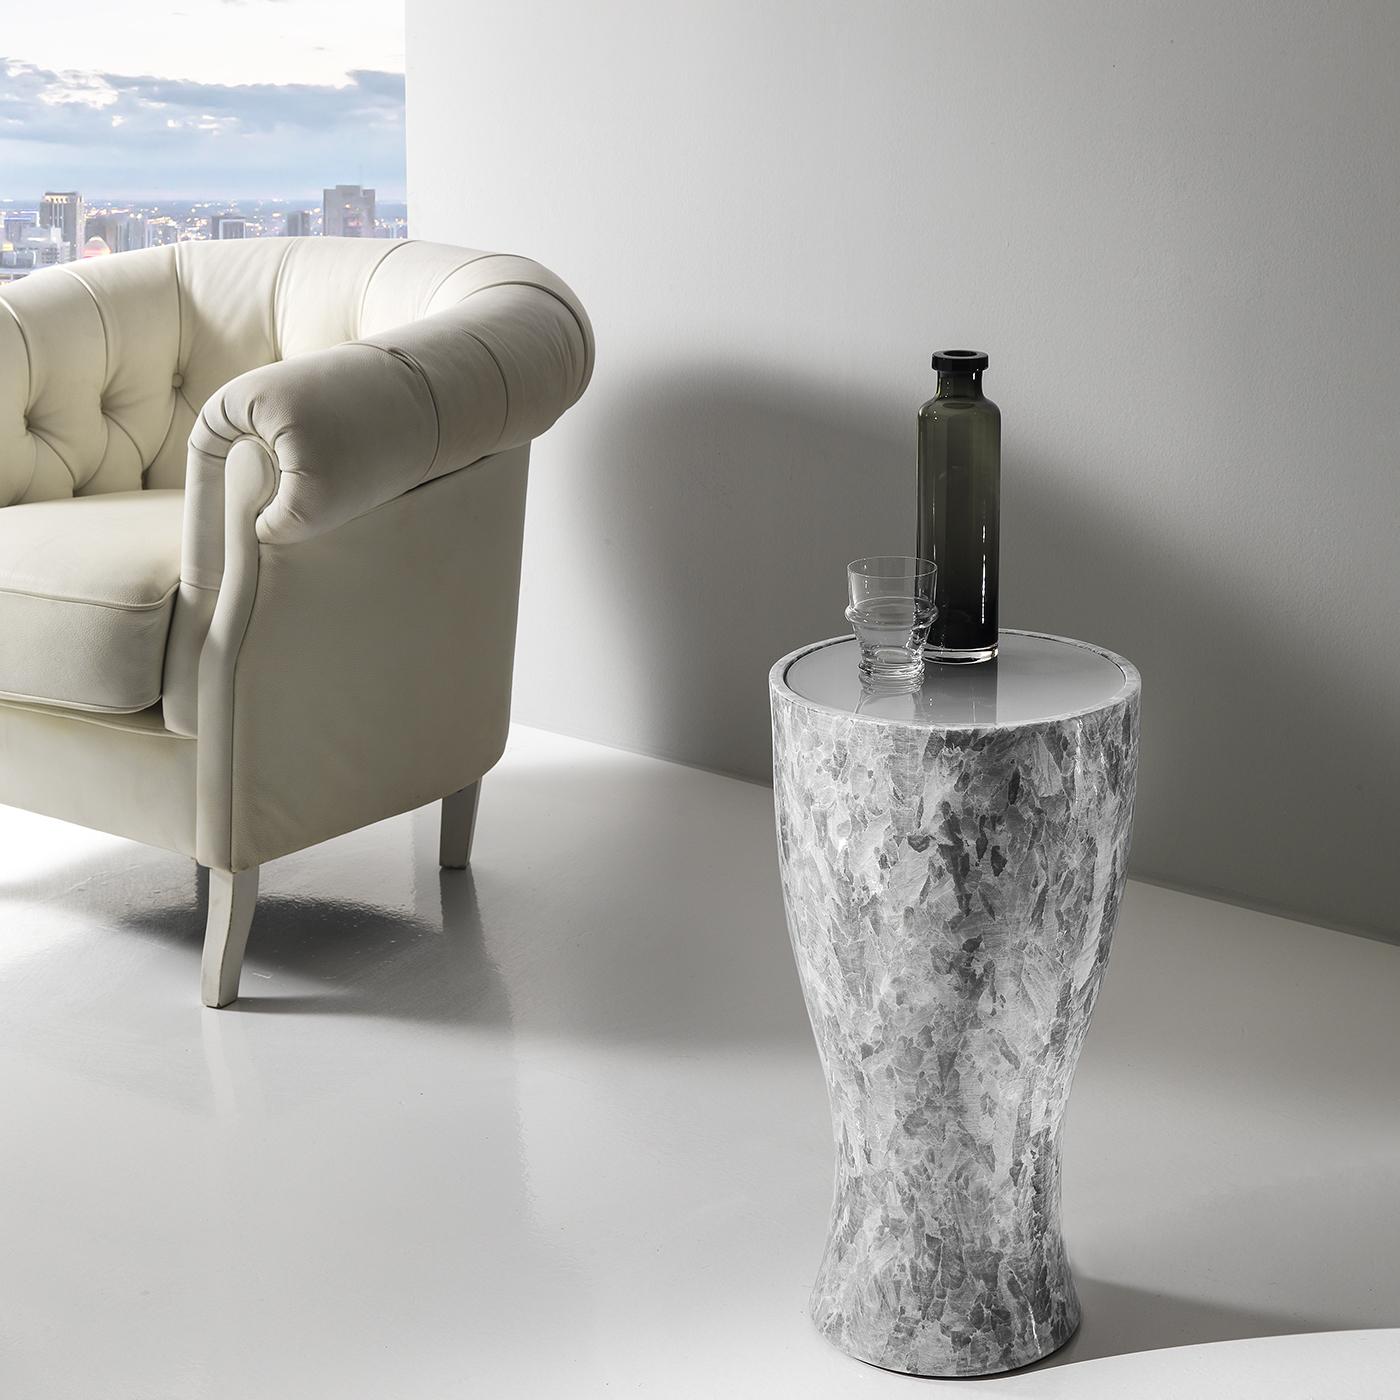 Simple yet breathtaking, this unique side table is entirely handcrafted of Crystal Stone®, a rare alabaster mined from the only quarry in the world located in Italy's Romagna region. Stunning as an end table or bedside table, the softly curved, urn